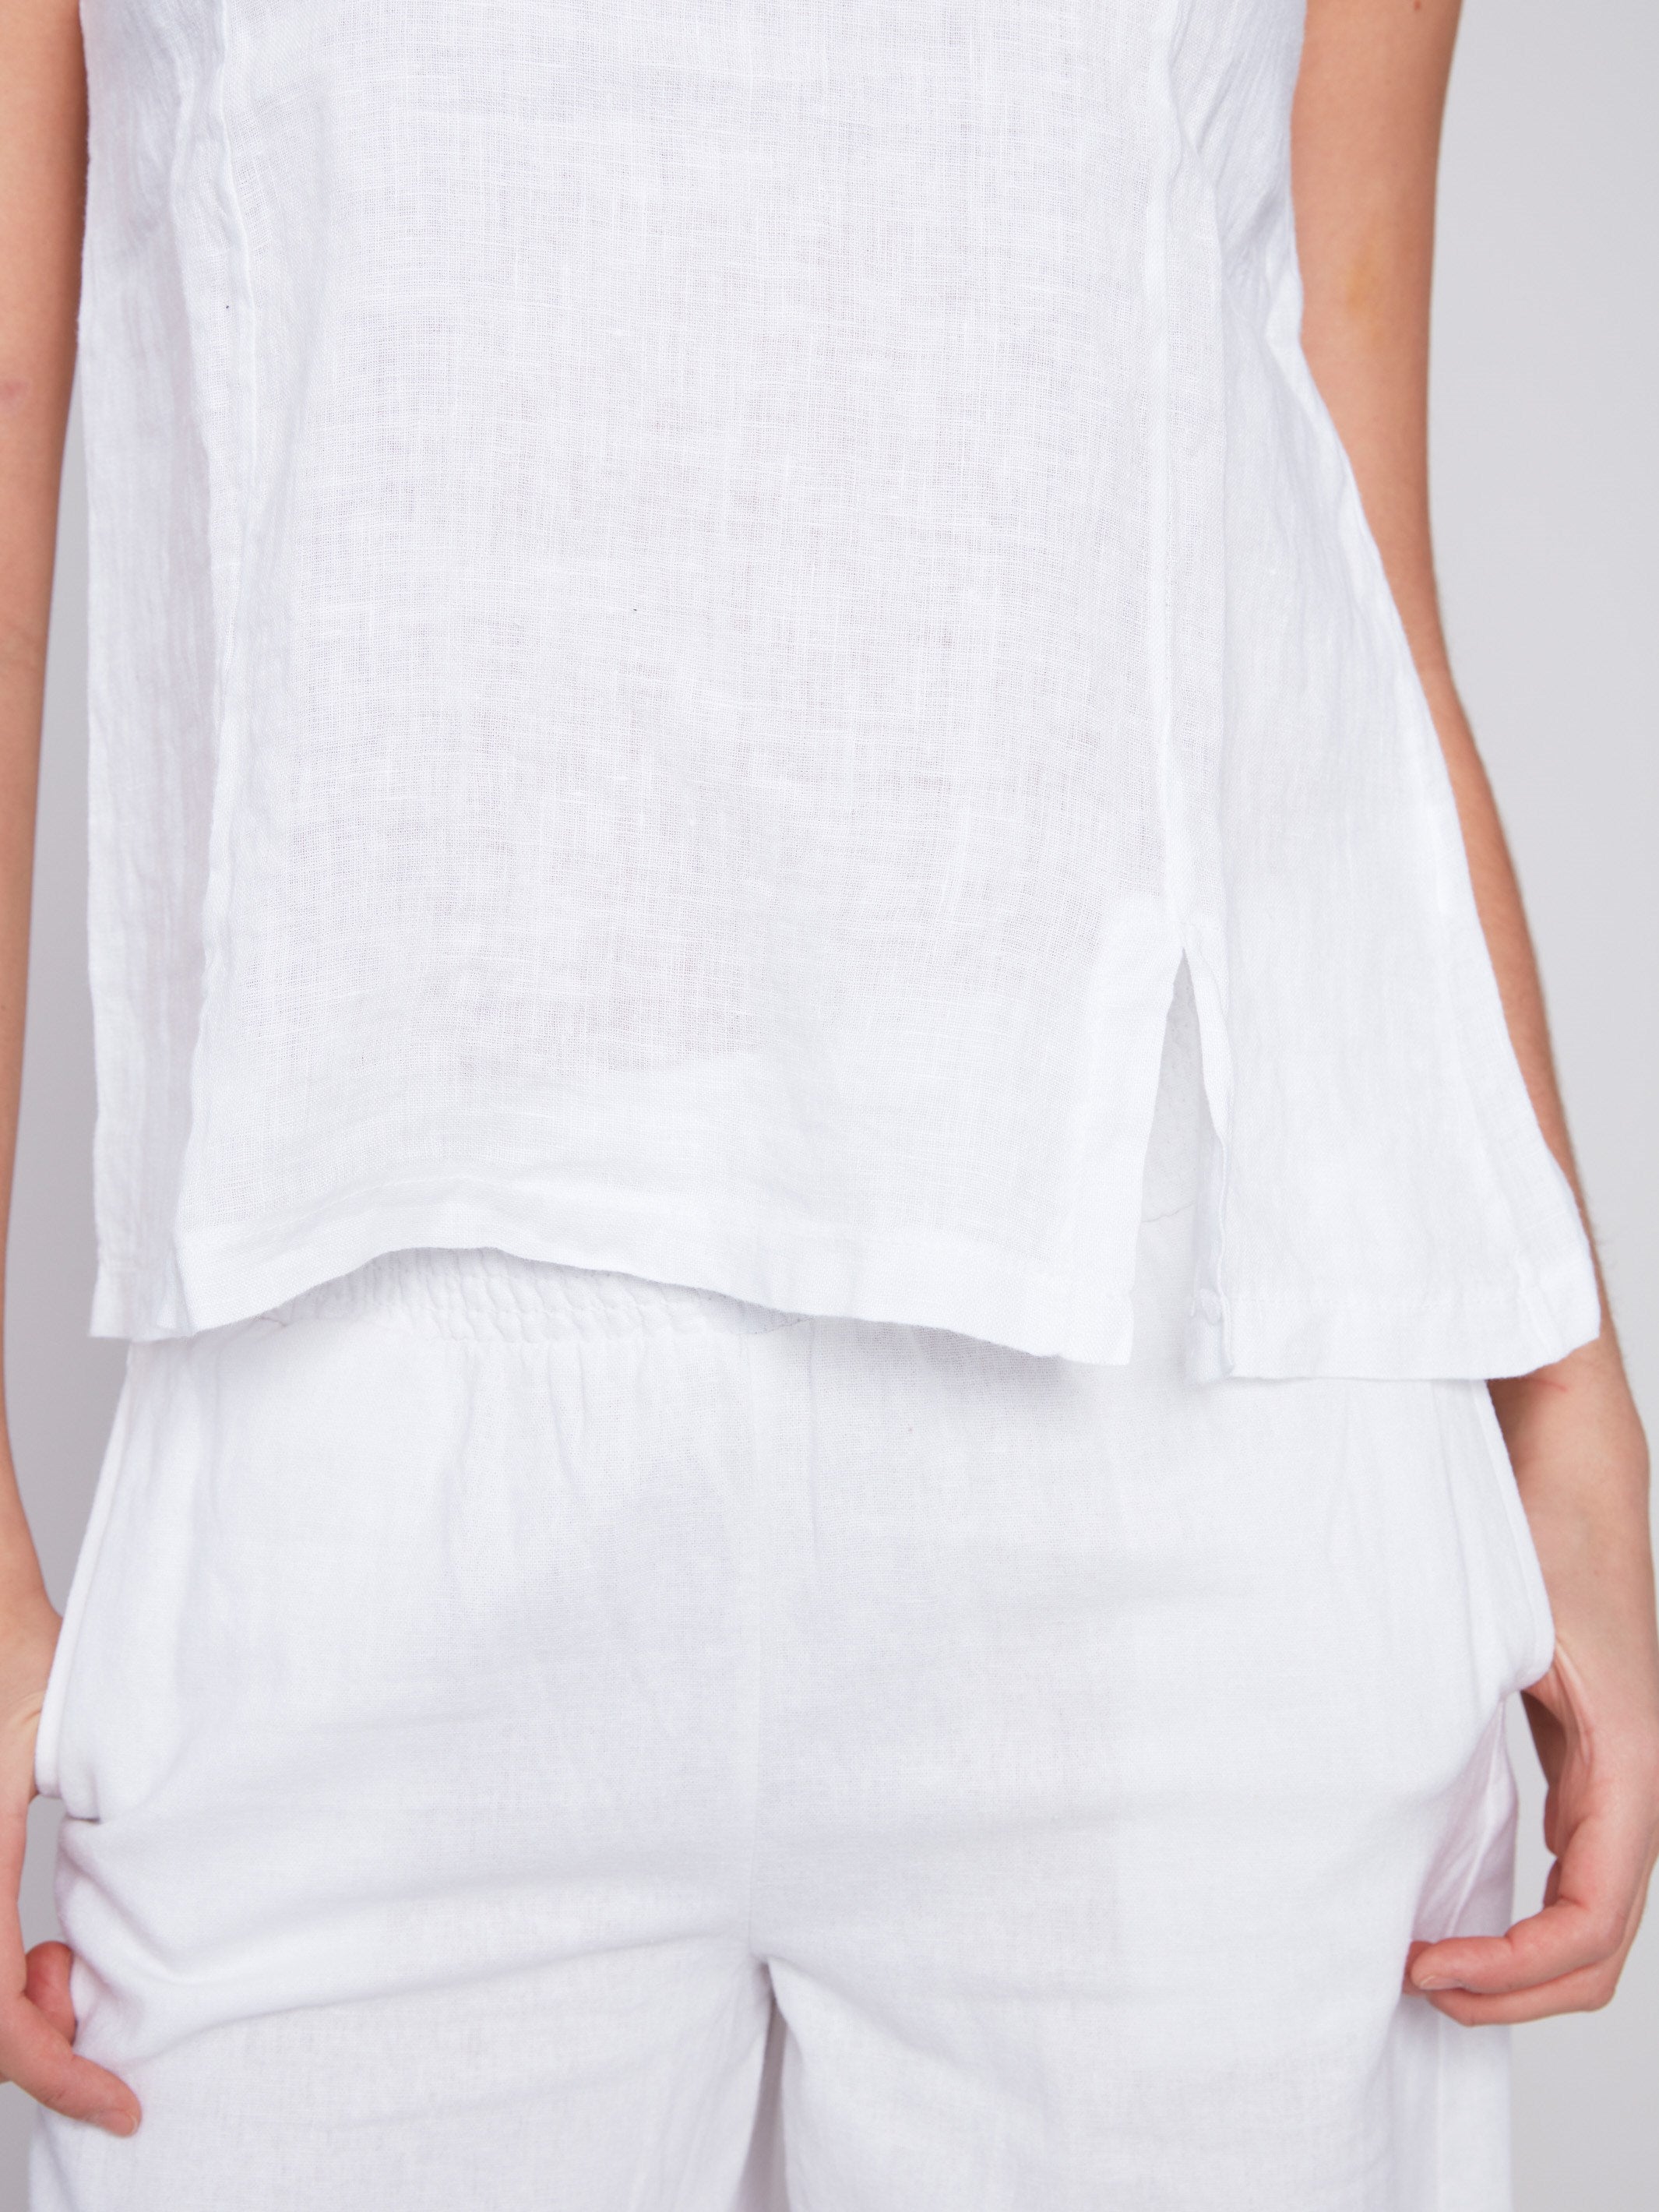 Sleeveless Linen Top with Slit - White - Charlie B Collection Canada - Image 3